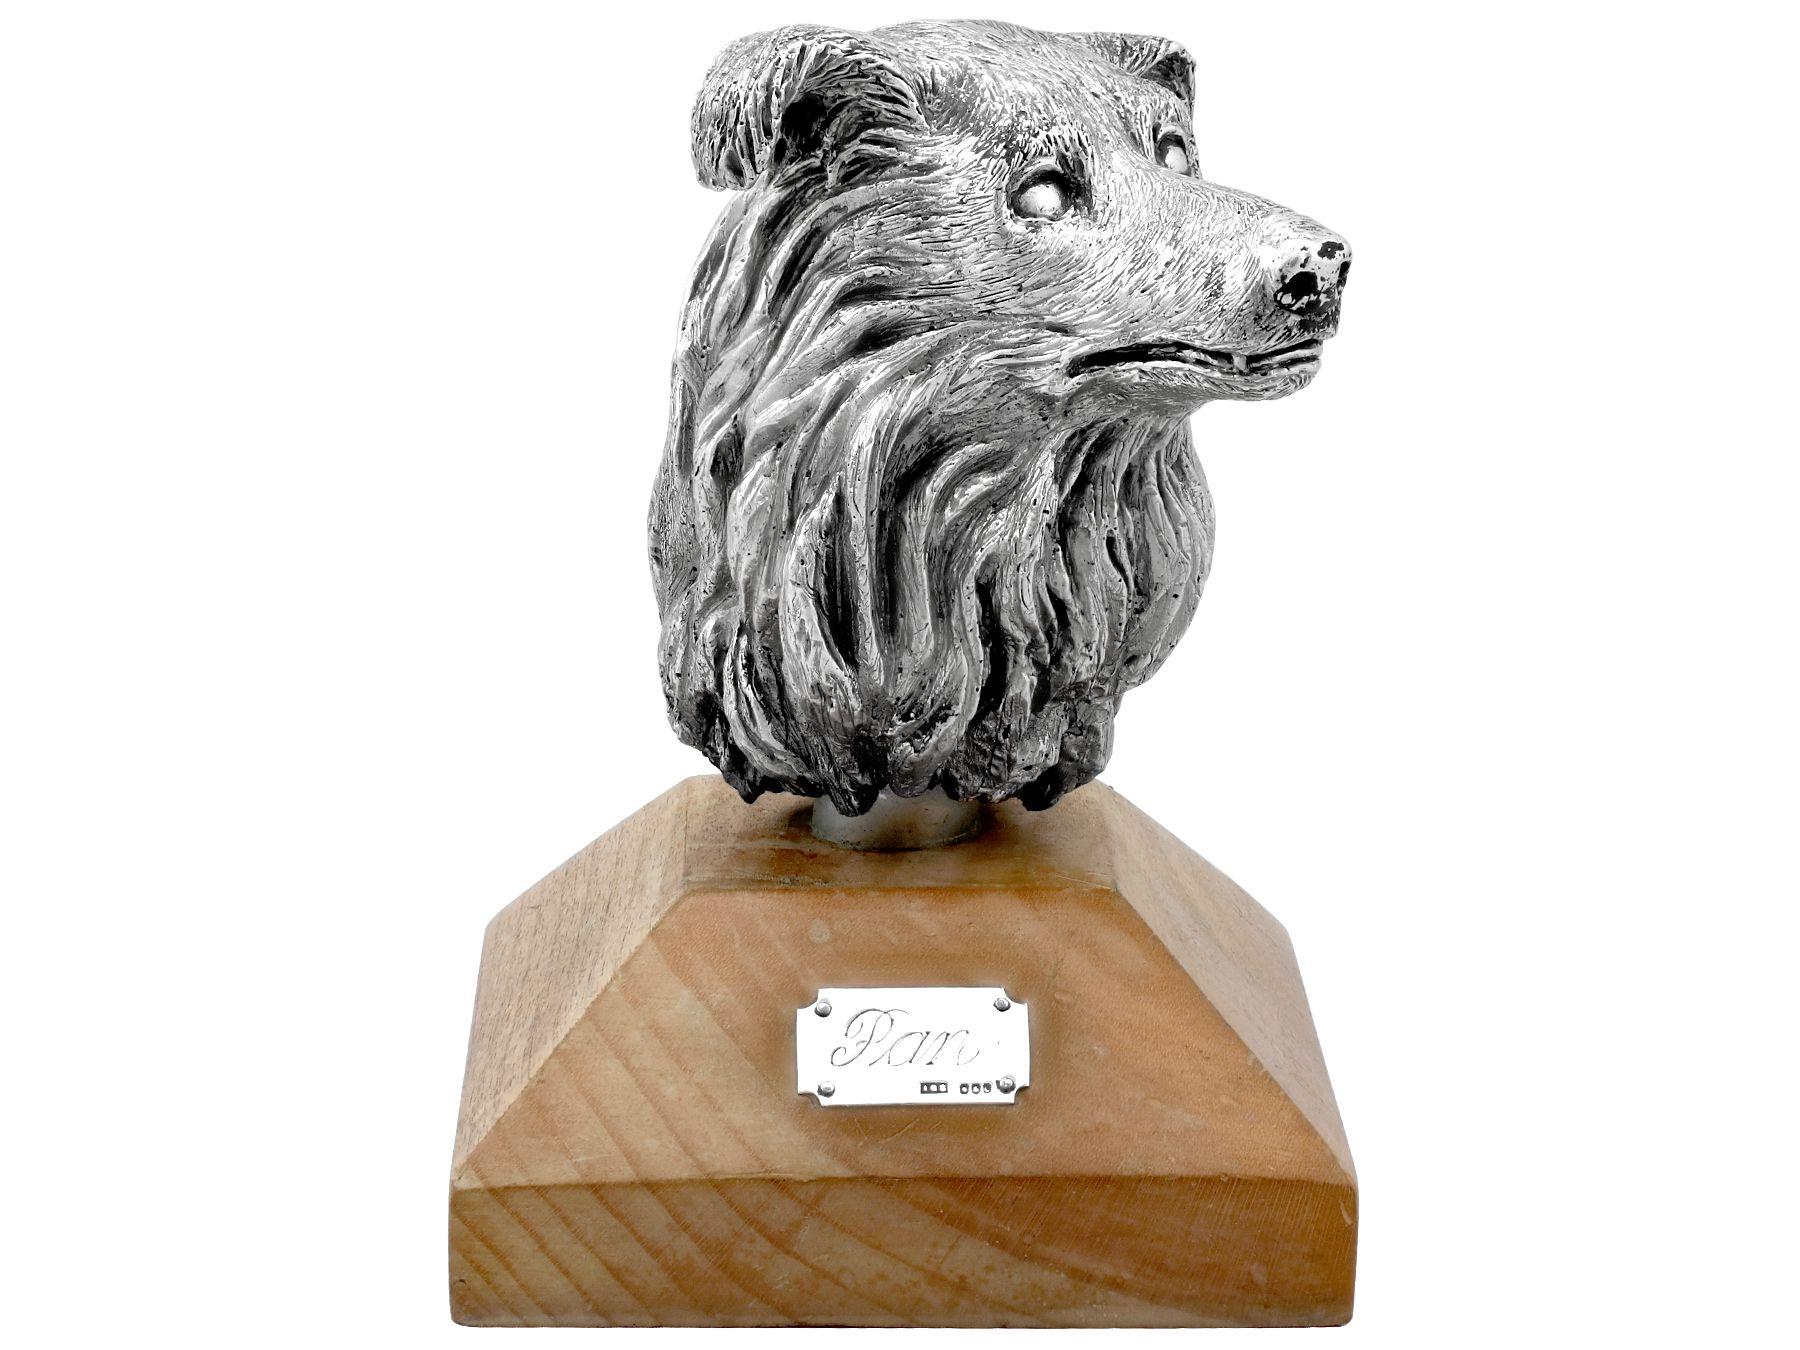 An exceptional, fine and impressive vintage Elizabeth II Scottish cast sterling silver and wood desk paperweight in the form of a dog's head; an addition to our animal related silverware collection

This exceptional vintage Elizabeth II cast